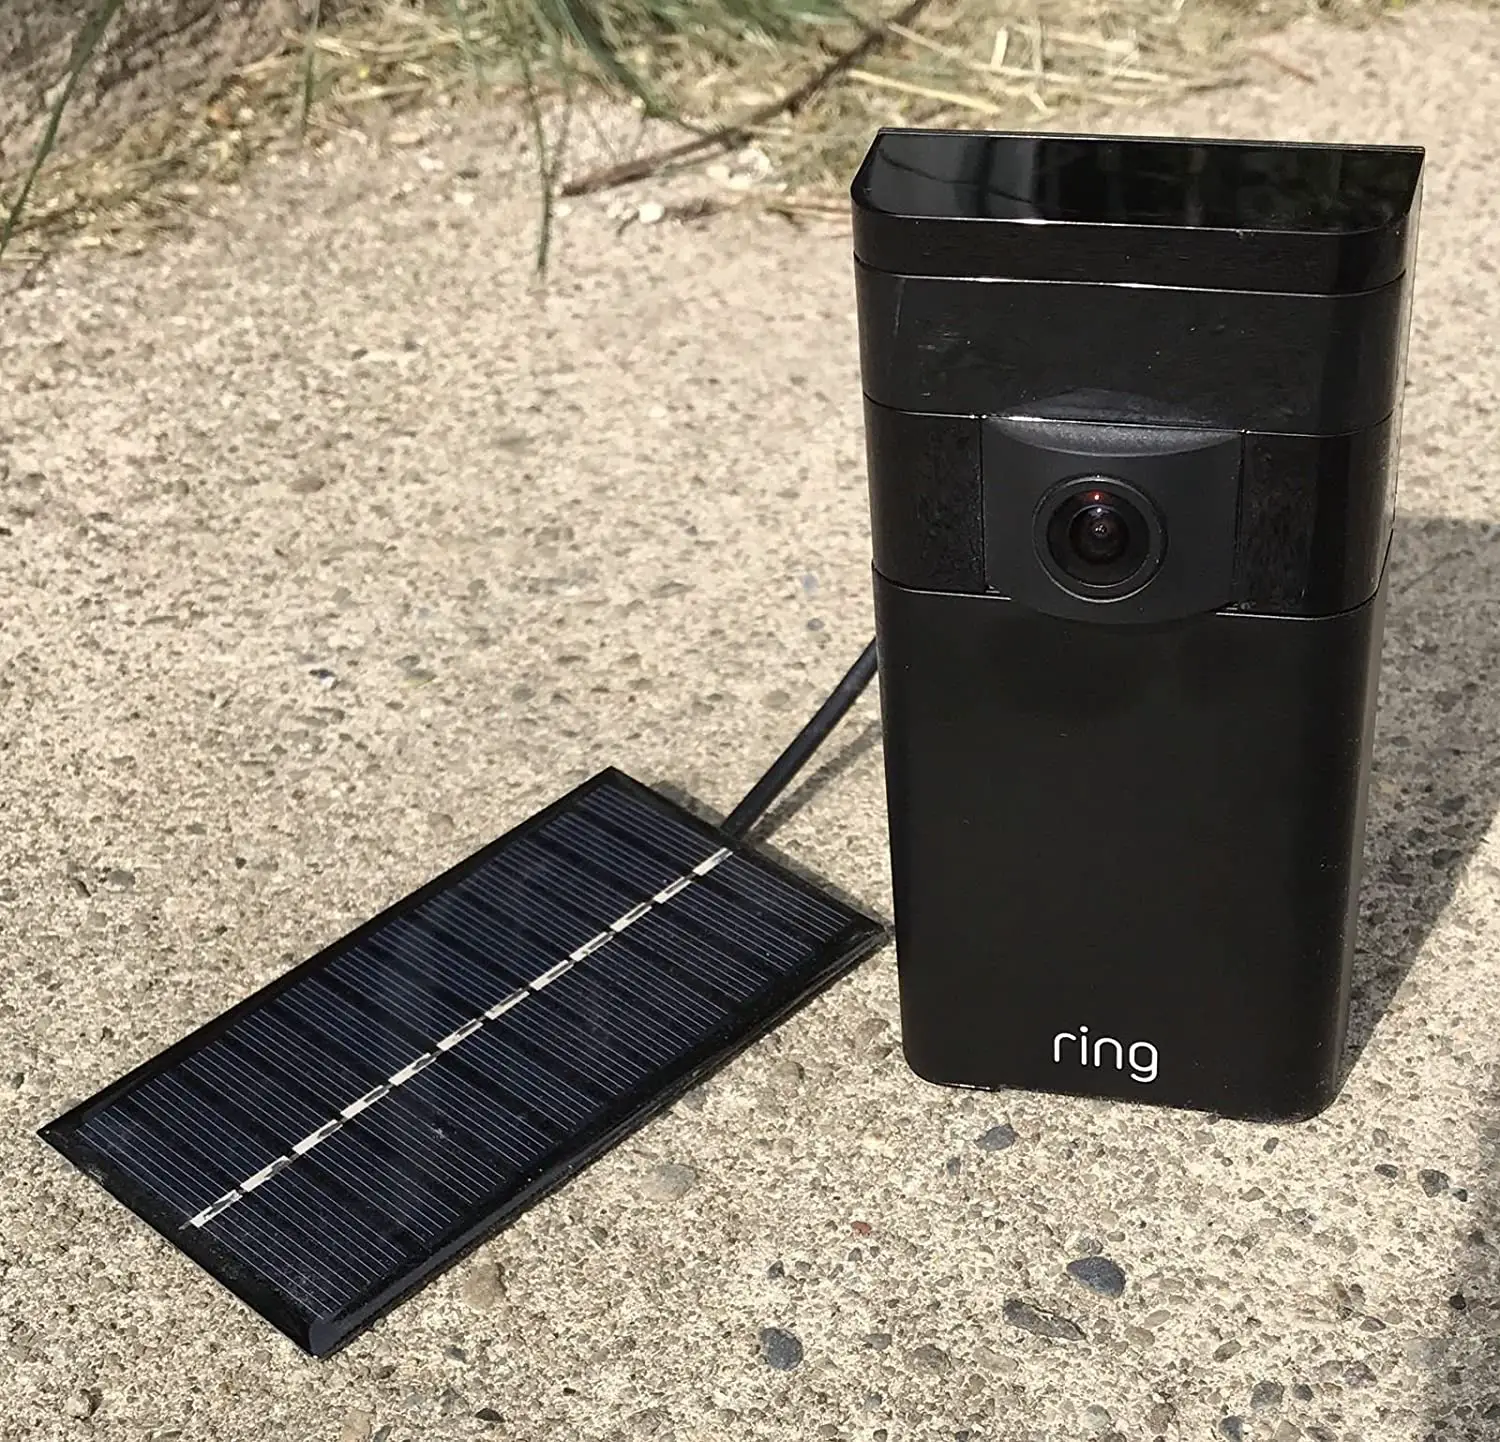 Amazon.com: New Solar Panel for Ring Stick Up Cam Power Your Ring ...